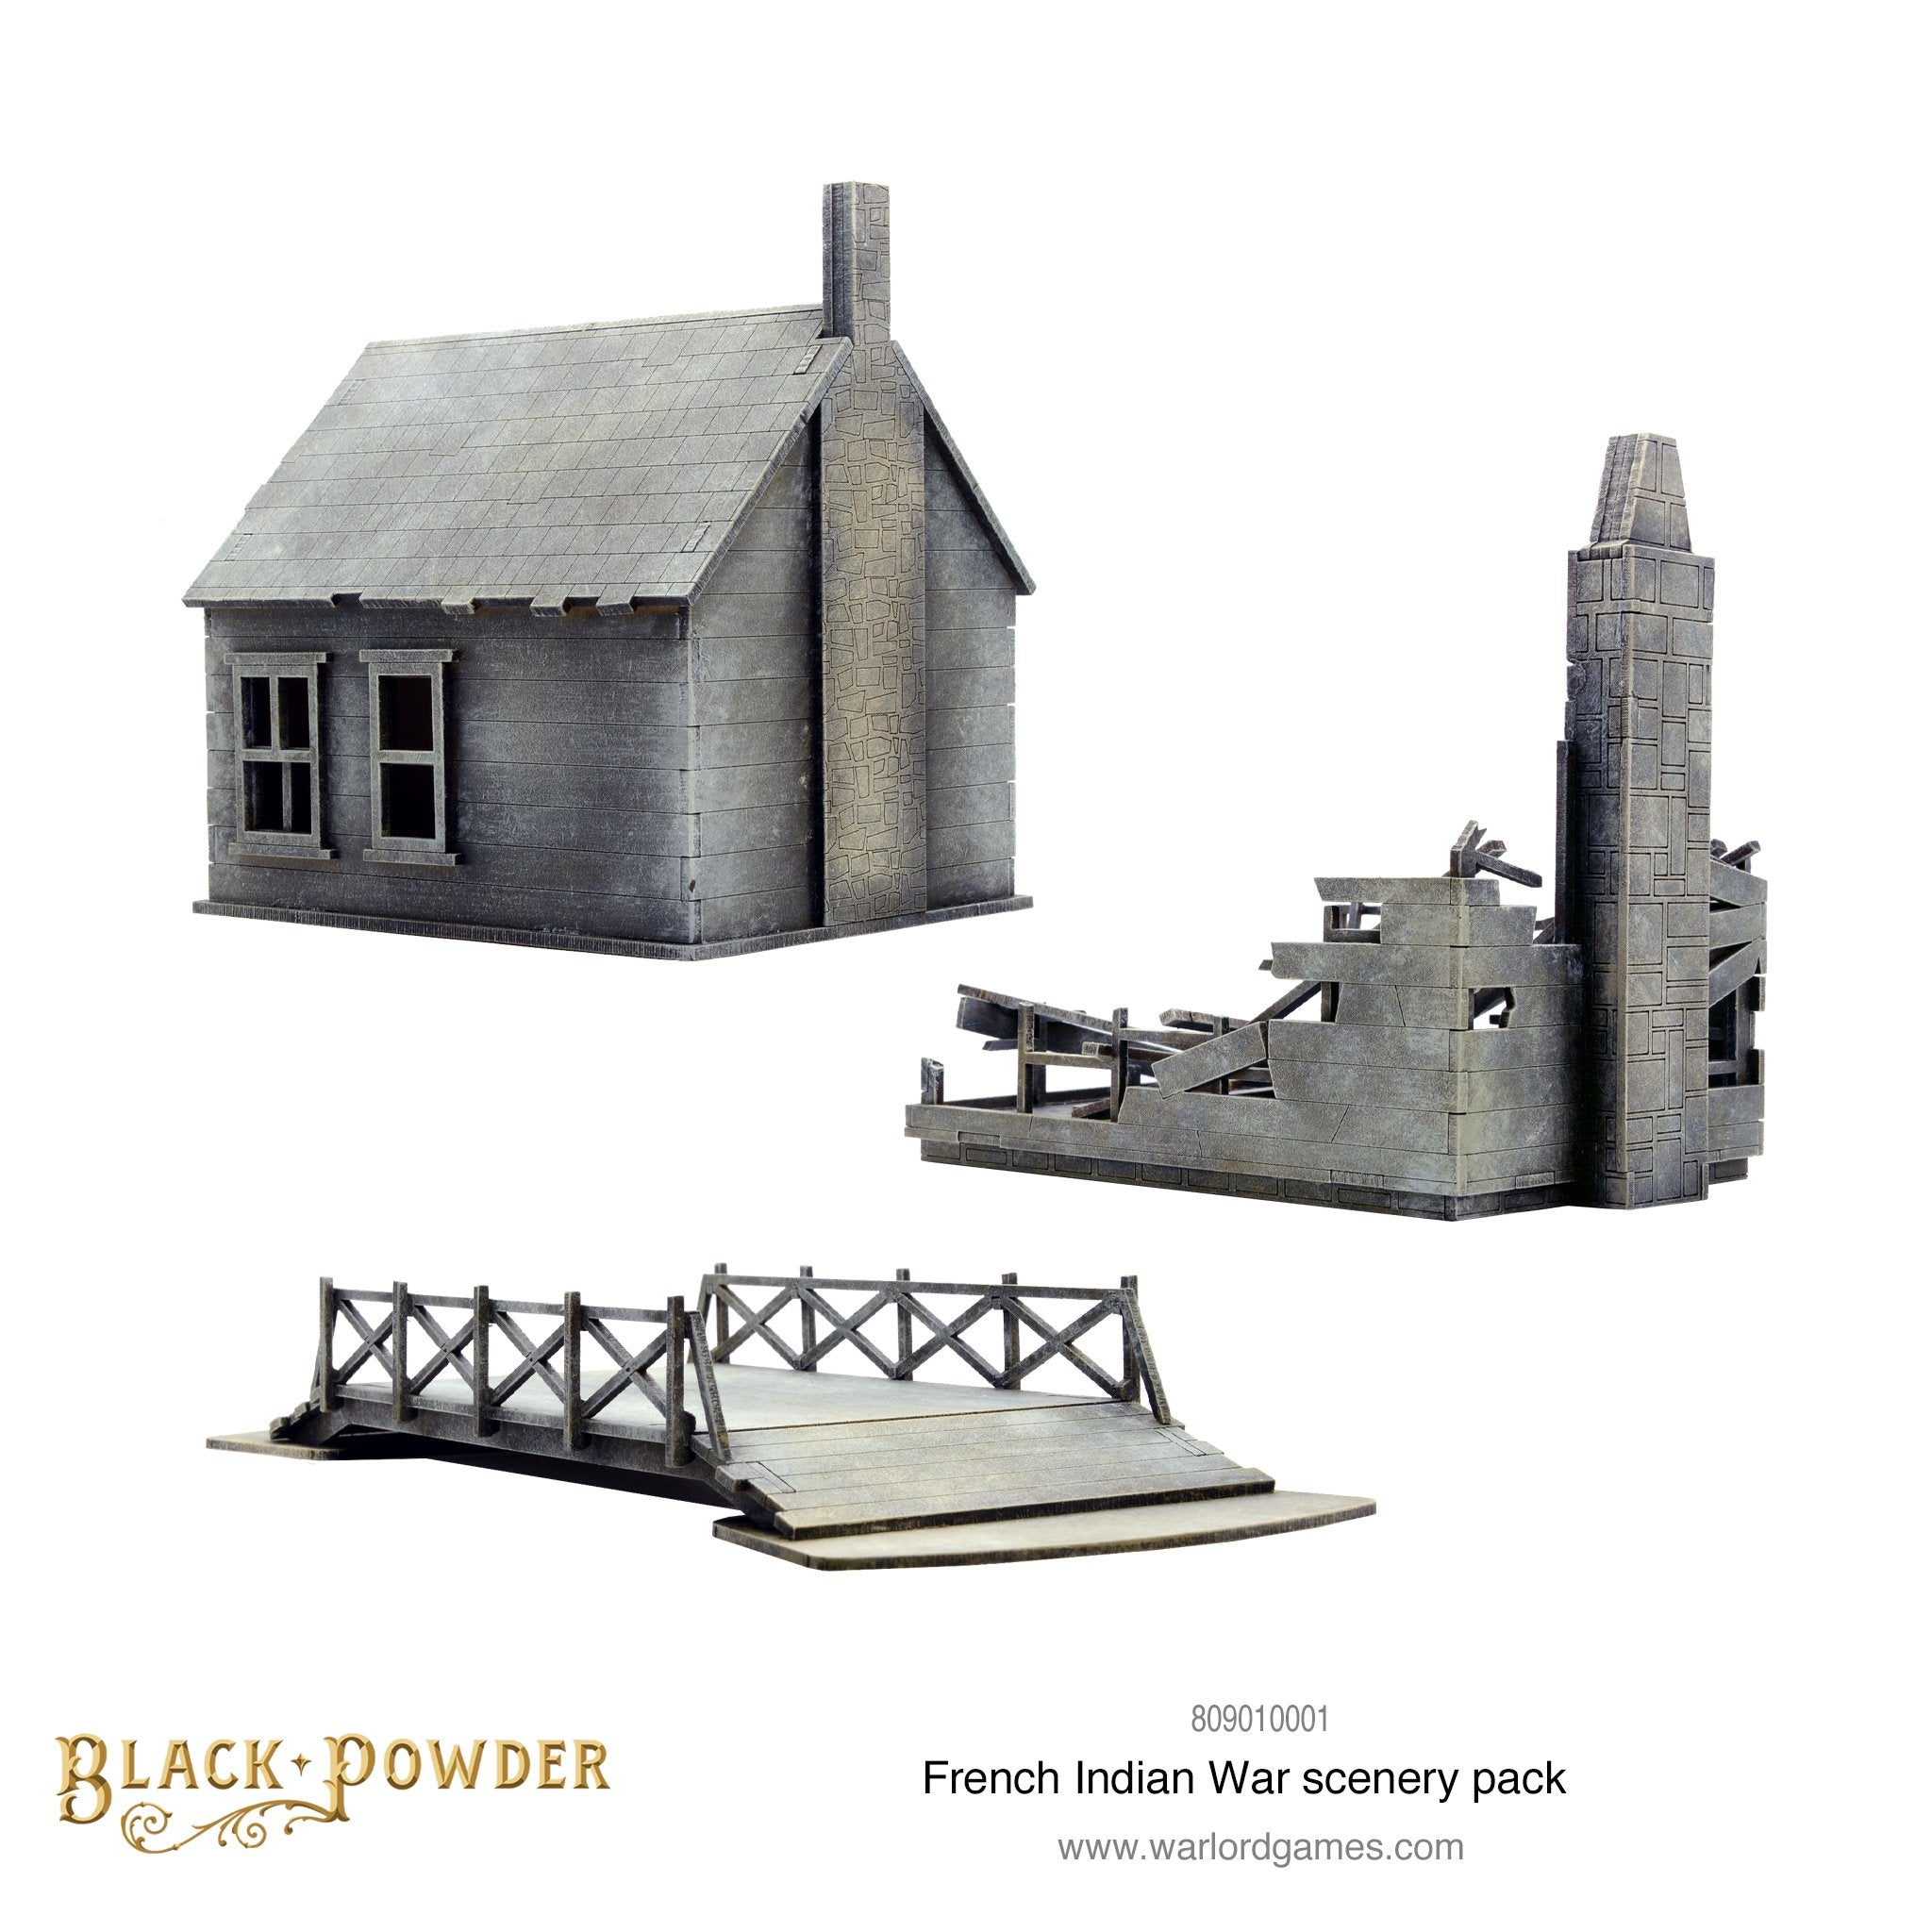 French Indian War scenery pack